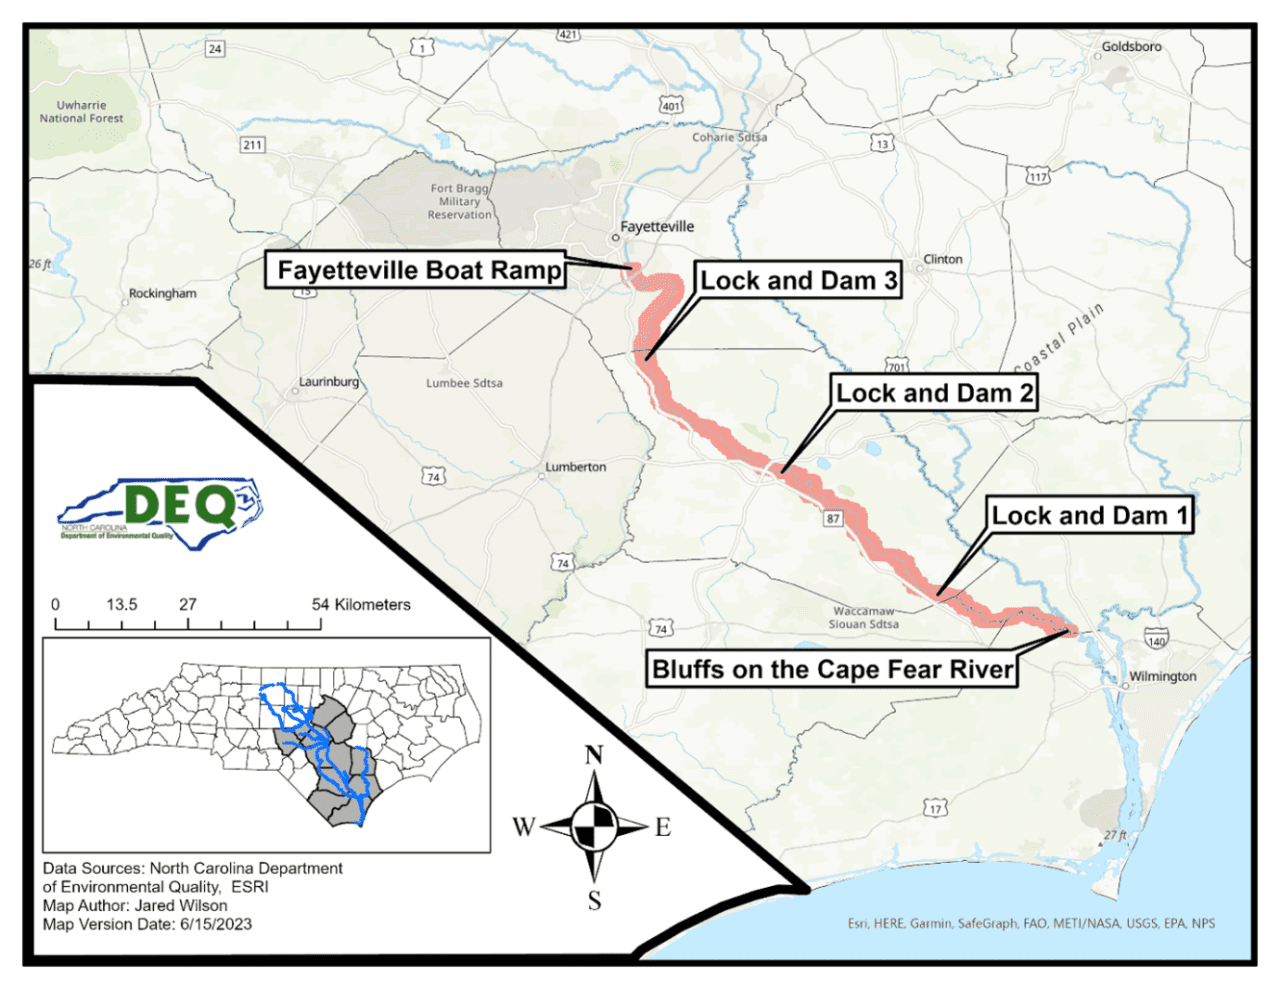 This map of the Cape Fear River shows the region covered by the PFOS fish consumption advisory, which is bounded by the Fayetteville boat ramp and the Bluffs on the Cape Fear. Map: Jared Wilson/NCDEQ